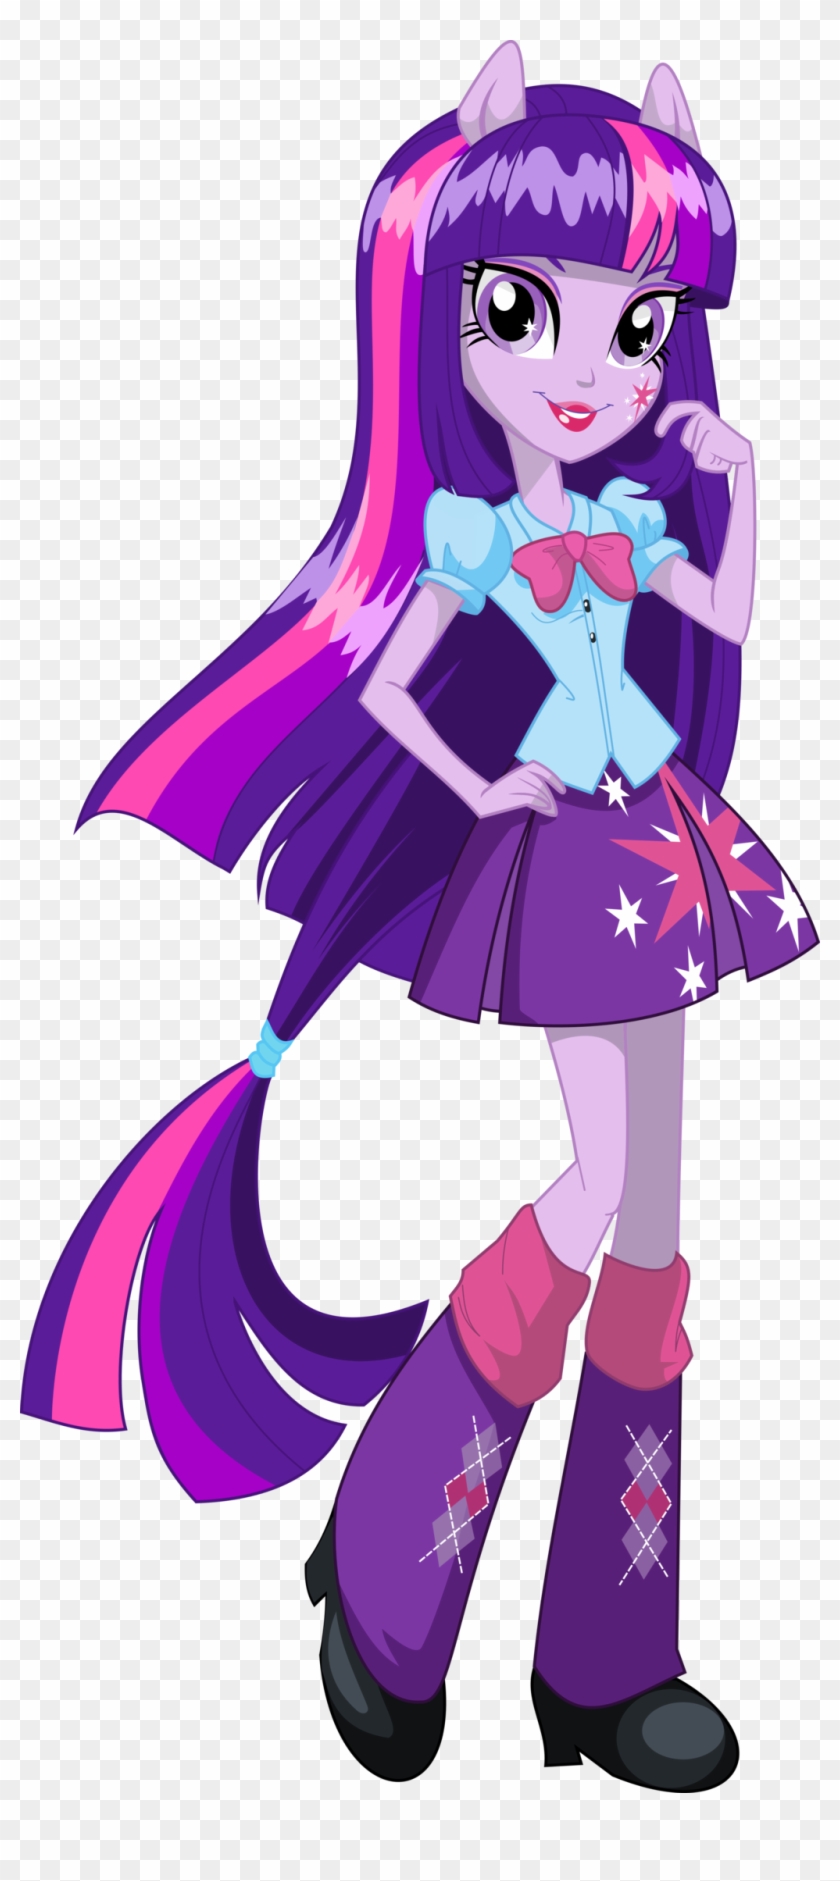 Vector Equestria Girls Box Twilight Sparkle By Will290590 - Twilight Sparkle Equestria Girl #902837